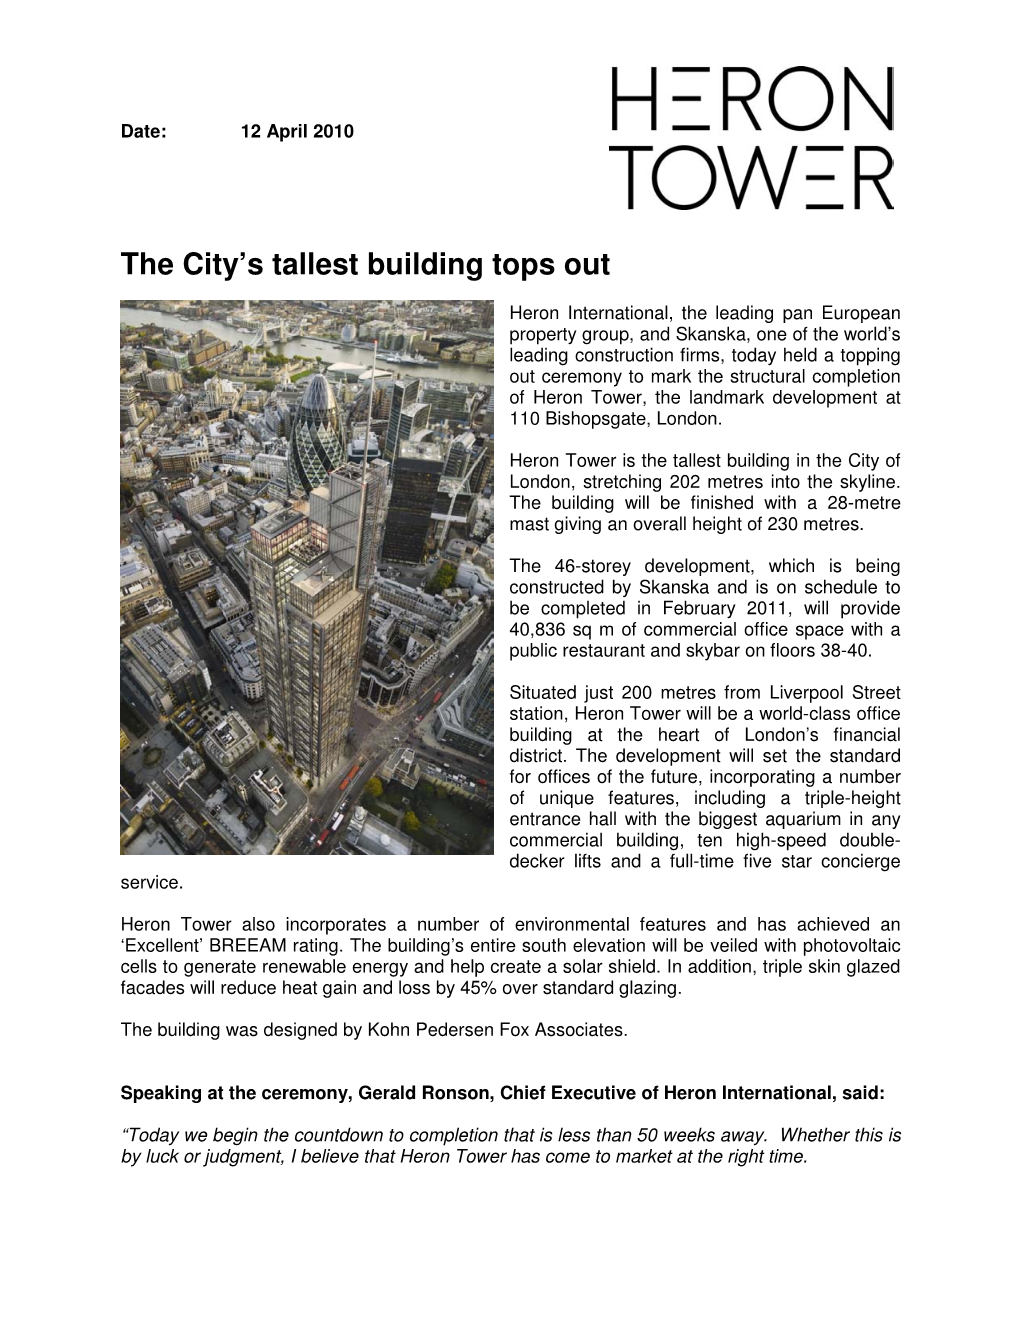 The City's Tallest Building Tops